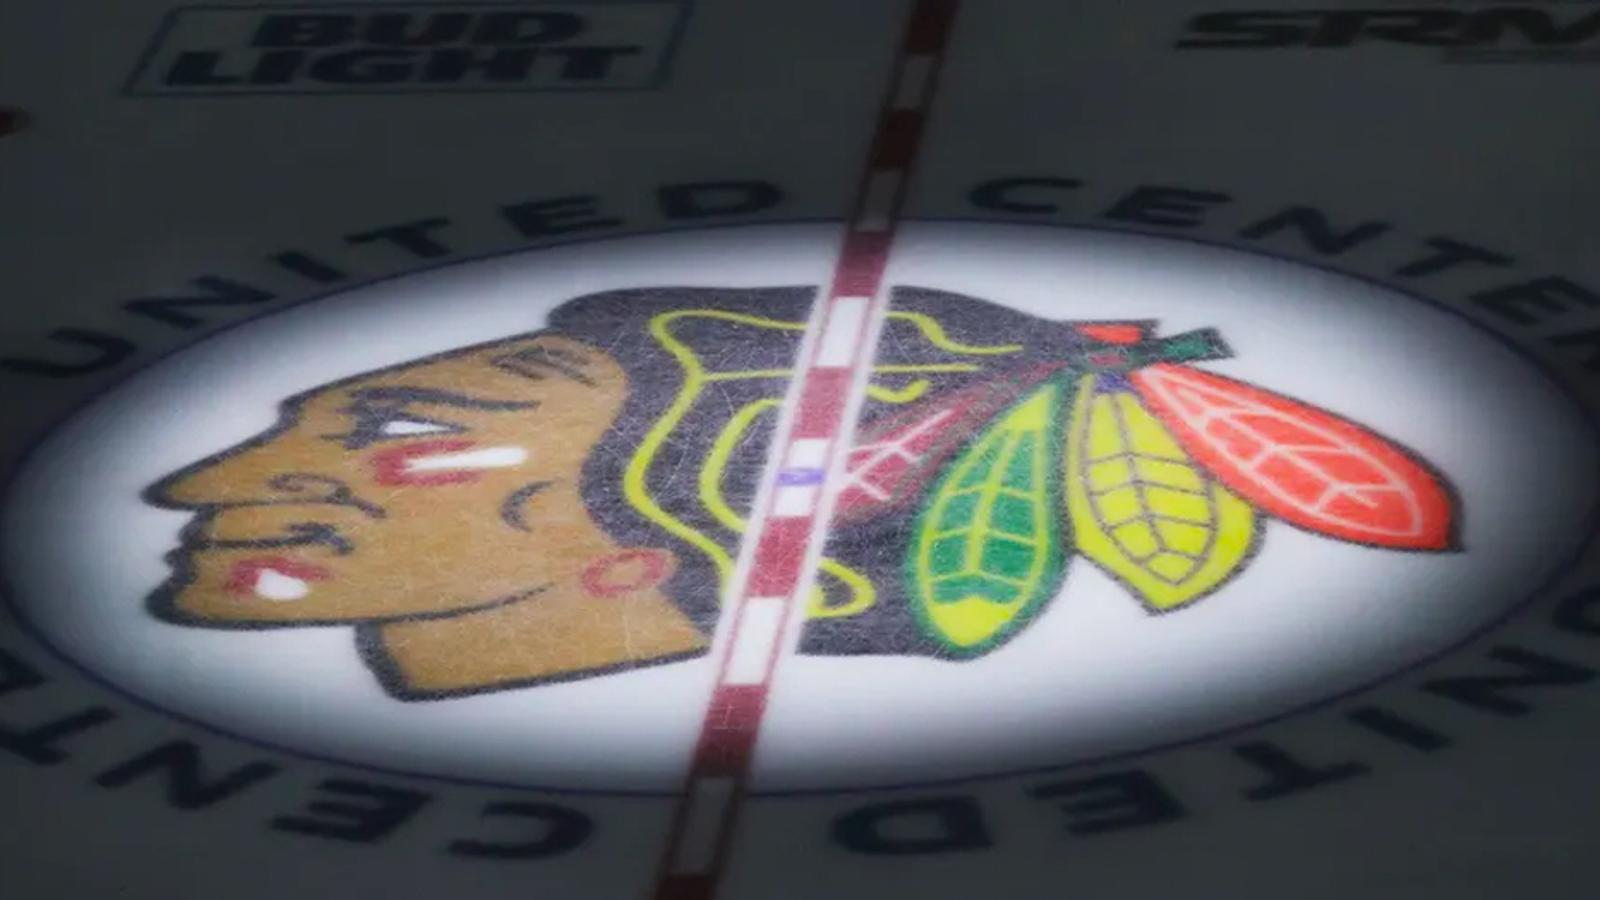 Alleged sexual assault of two former Blackhawks was an “open secret” amongst players and staff